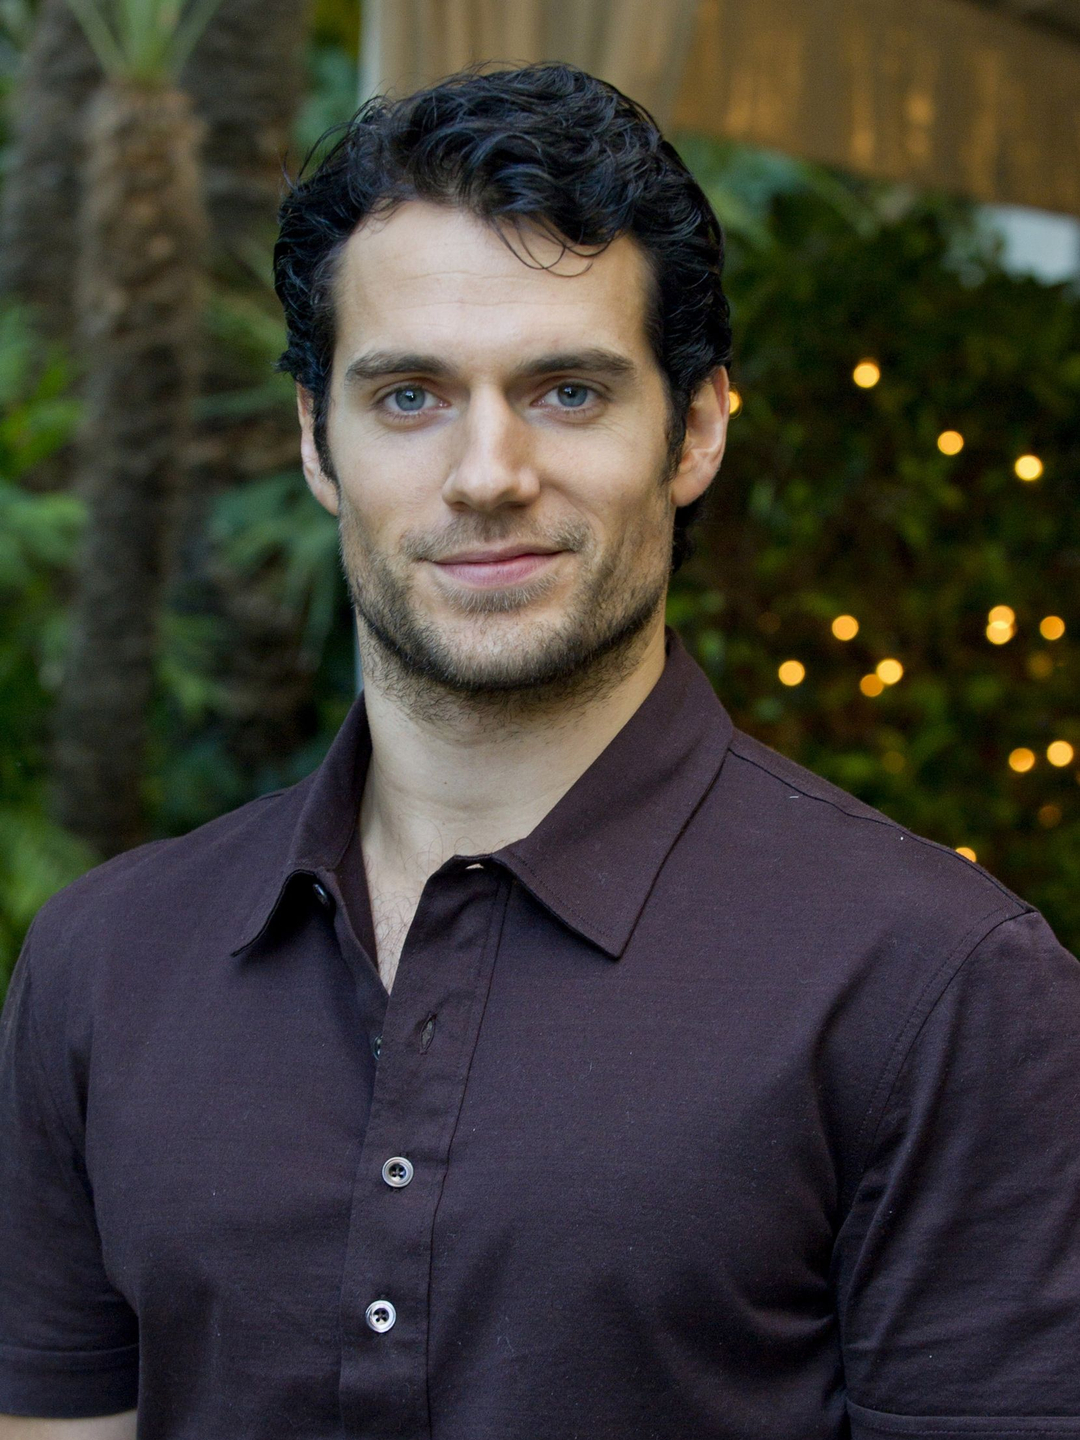 Henry Cavill current look